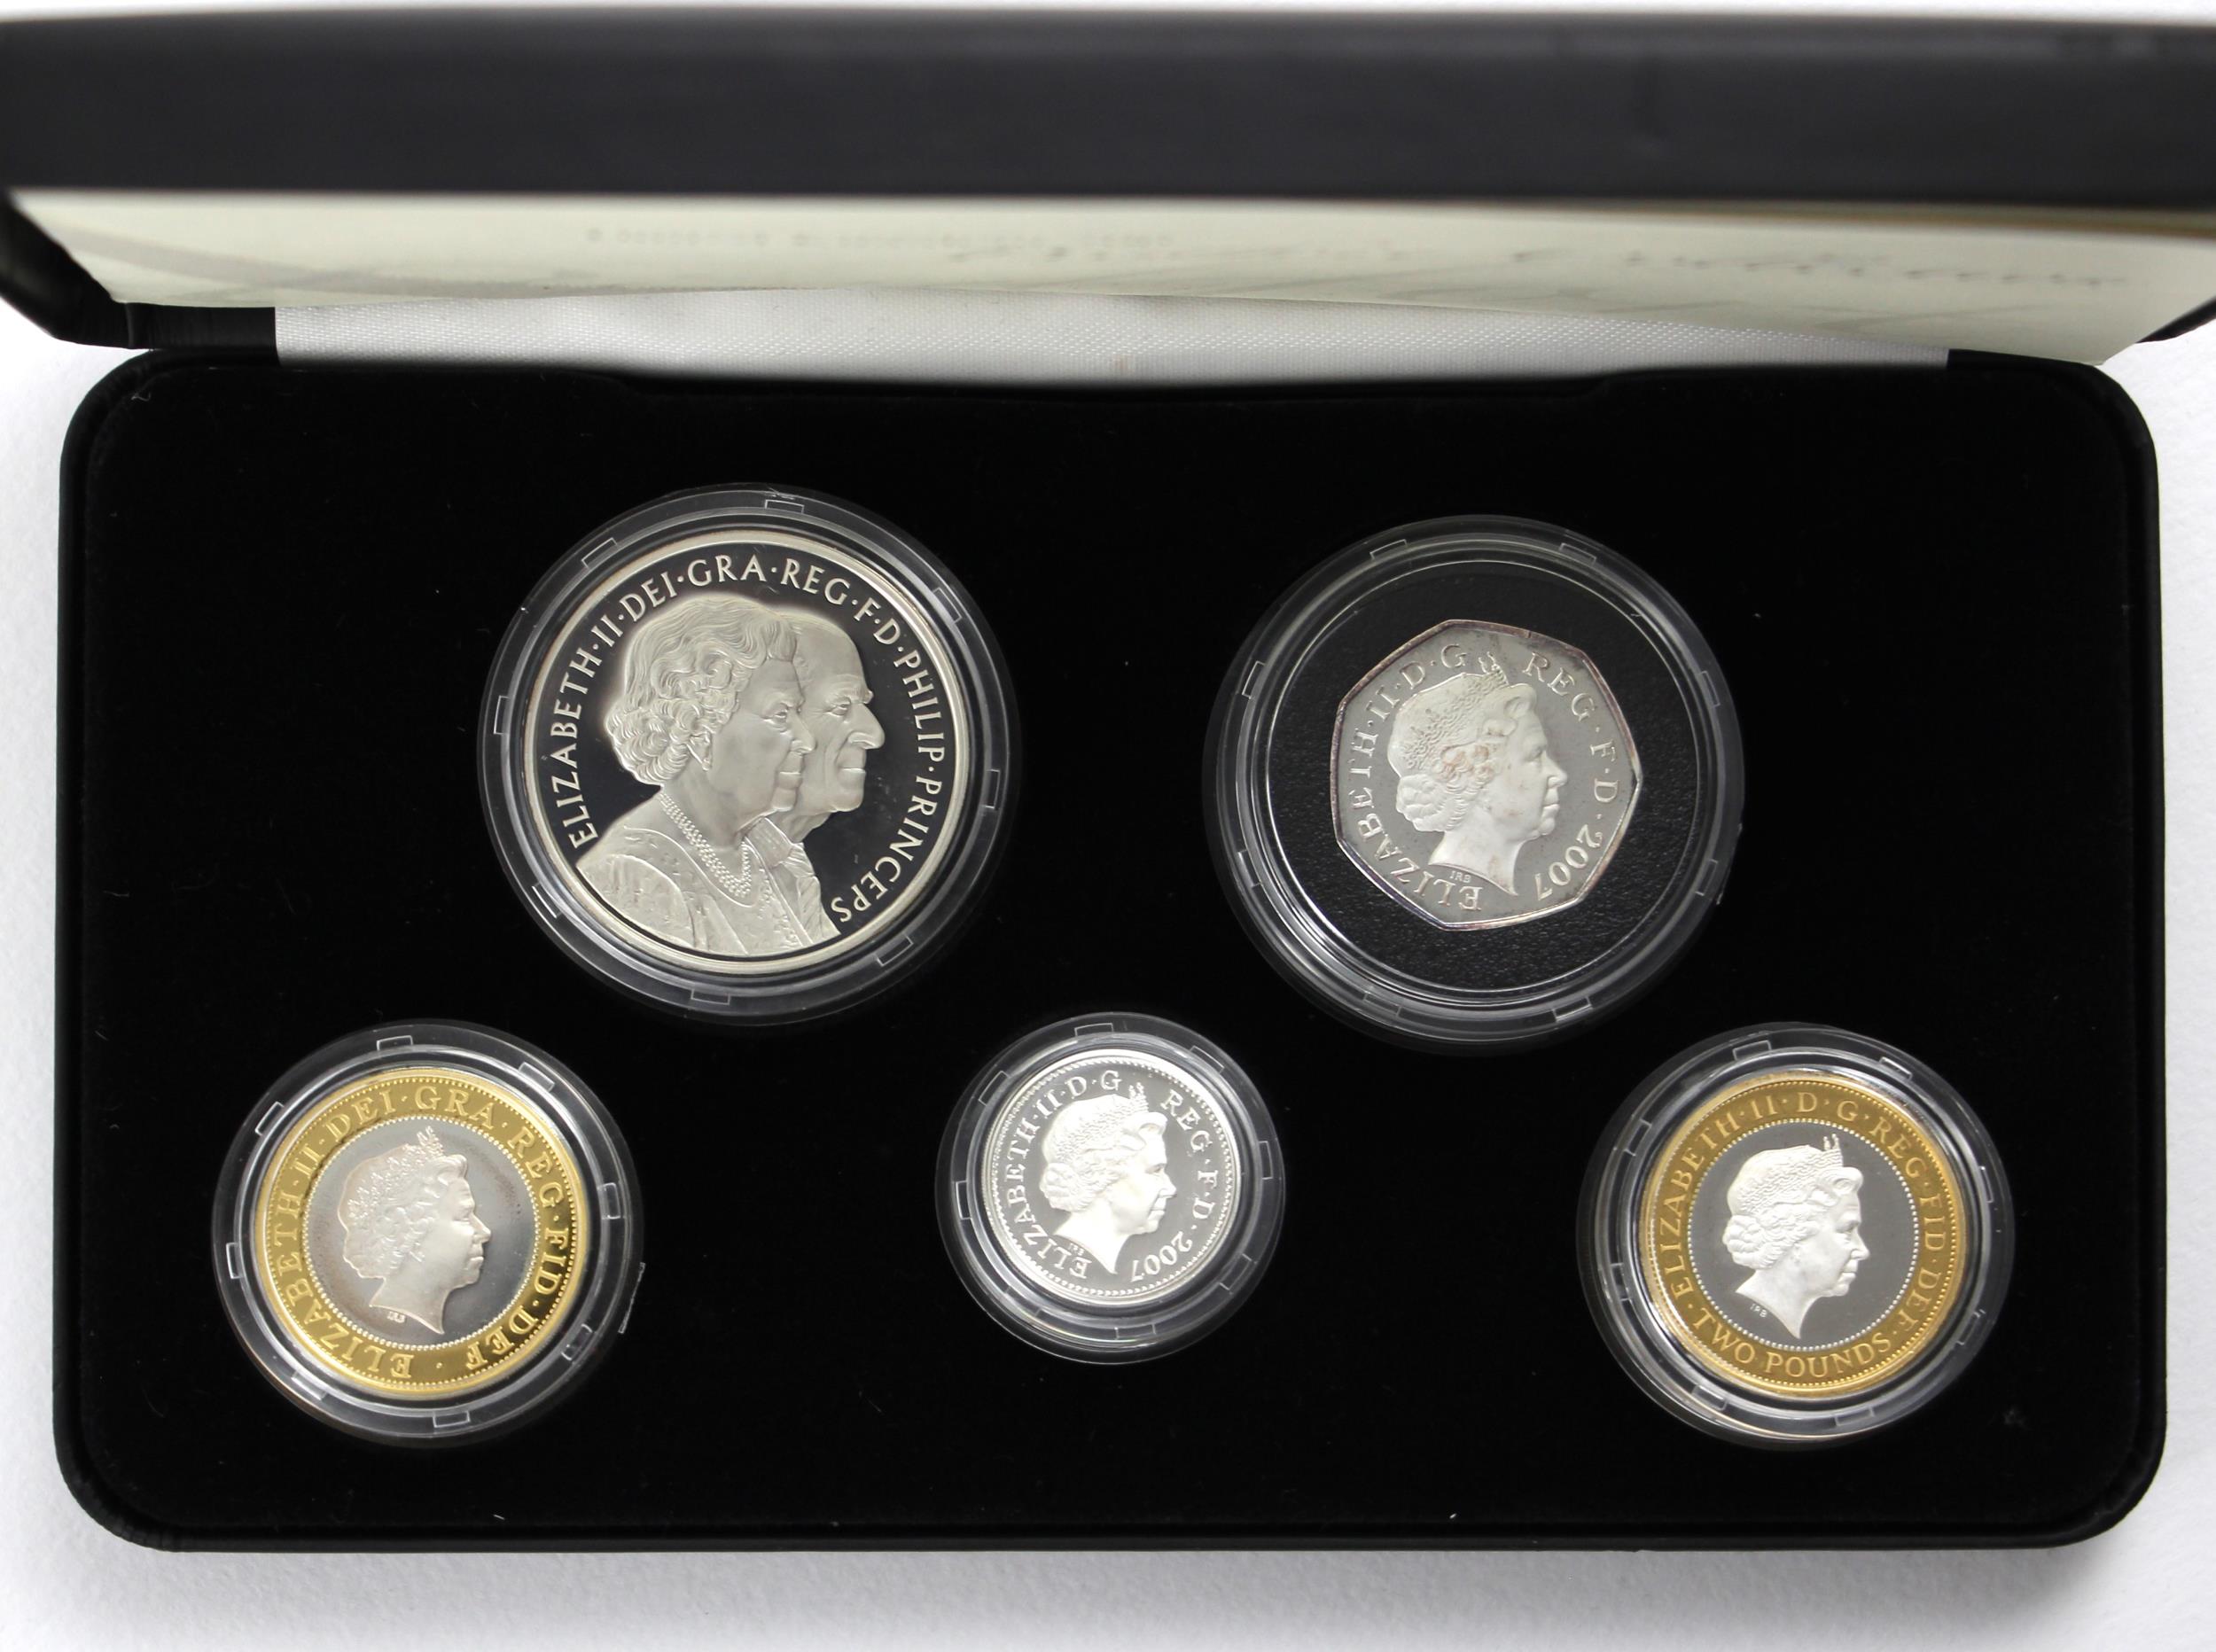 Elizabeth II (1952-2022), The Largest and Purest Year of Three Kings silver Coin, 2011, Proof, no. - Image 3 of 5